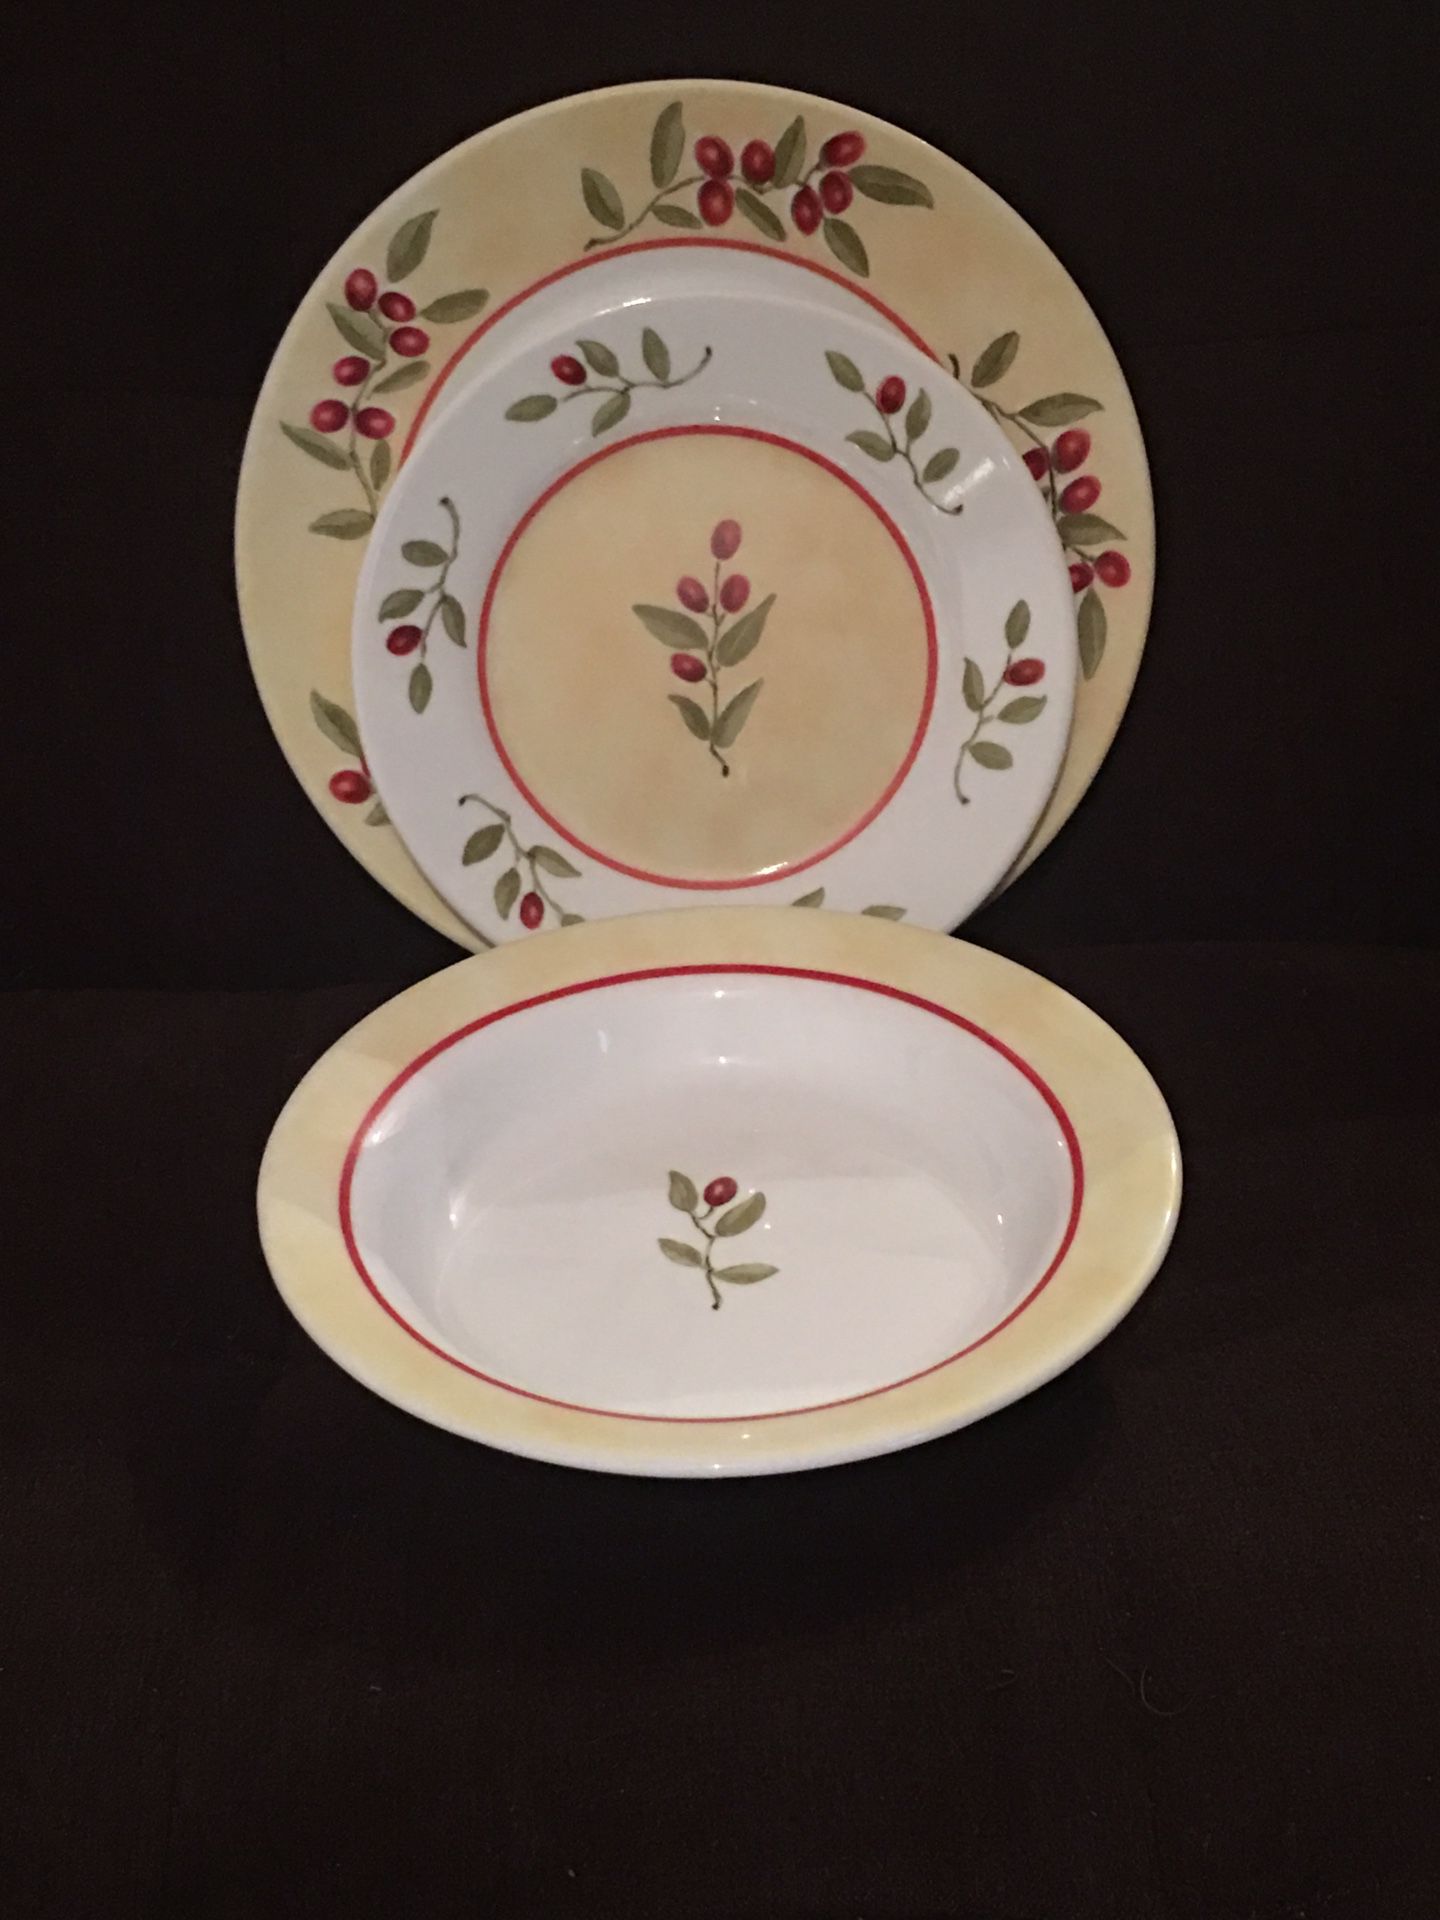 Set of 4 Corelle Ultra Dinner Plates, Salad Plates & Bowls—Red Berries